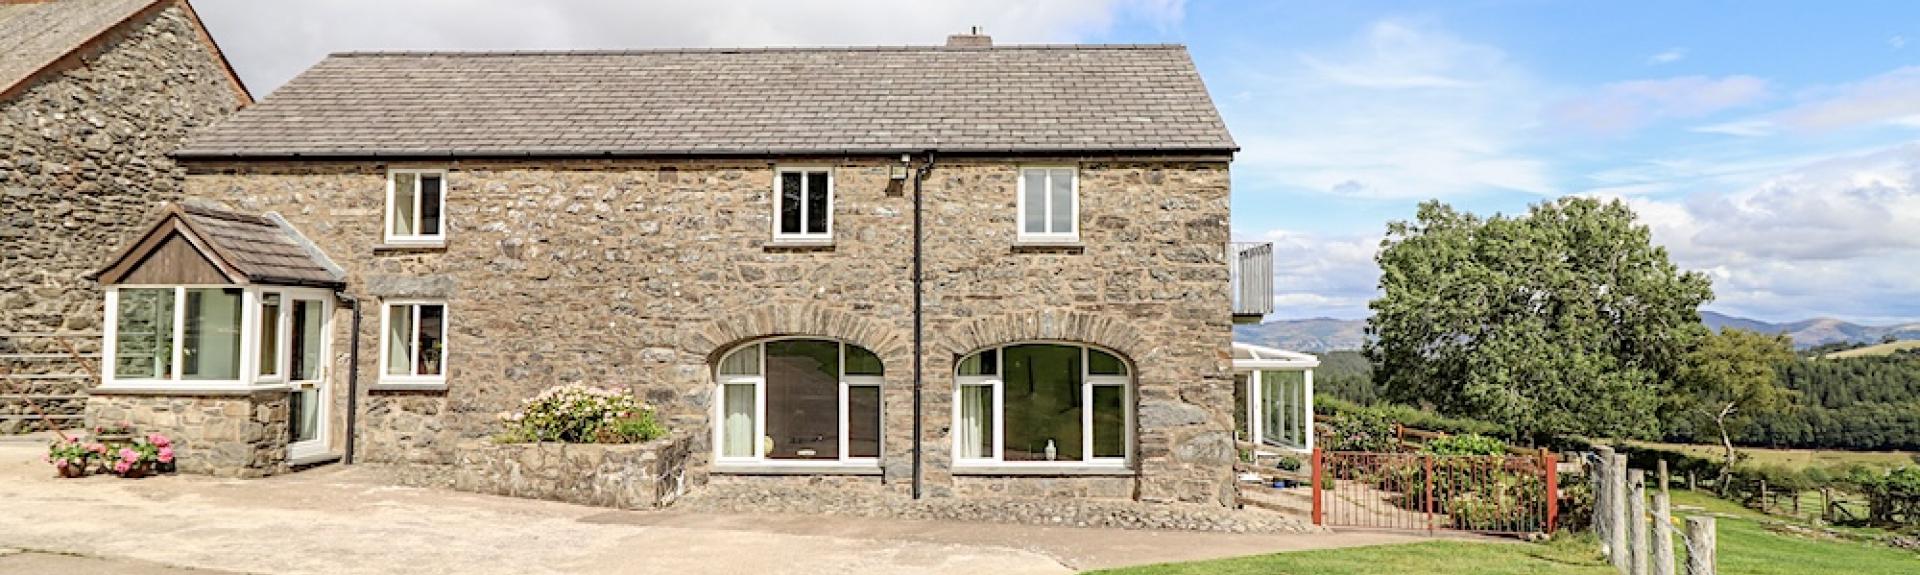 A 2-storey barn conversion overlooks a paved courtyard and open countryside in North Wales.